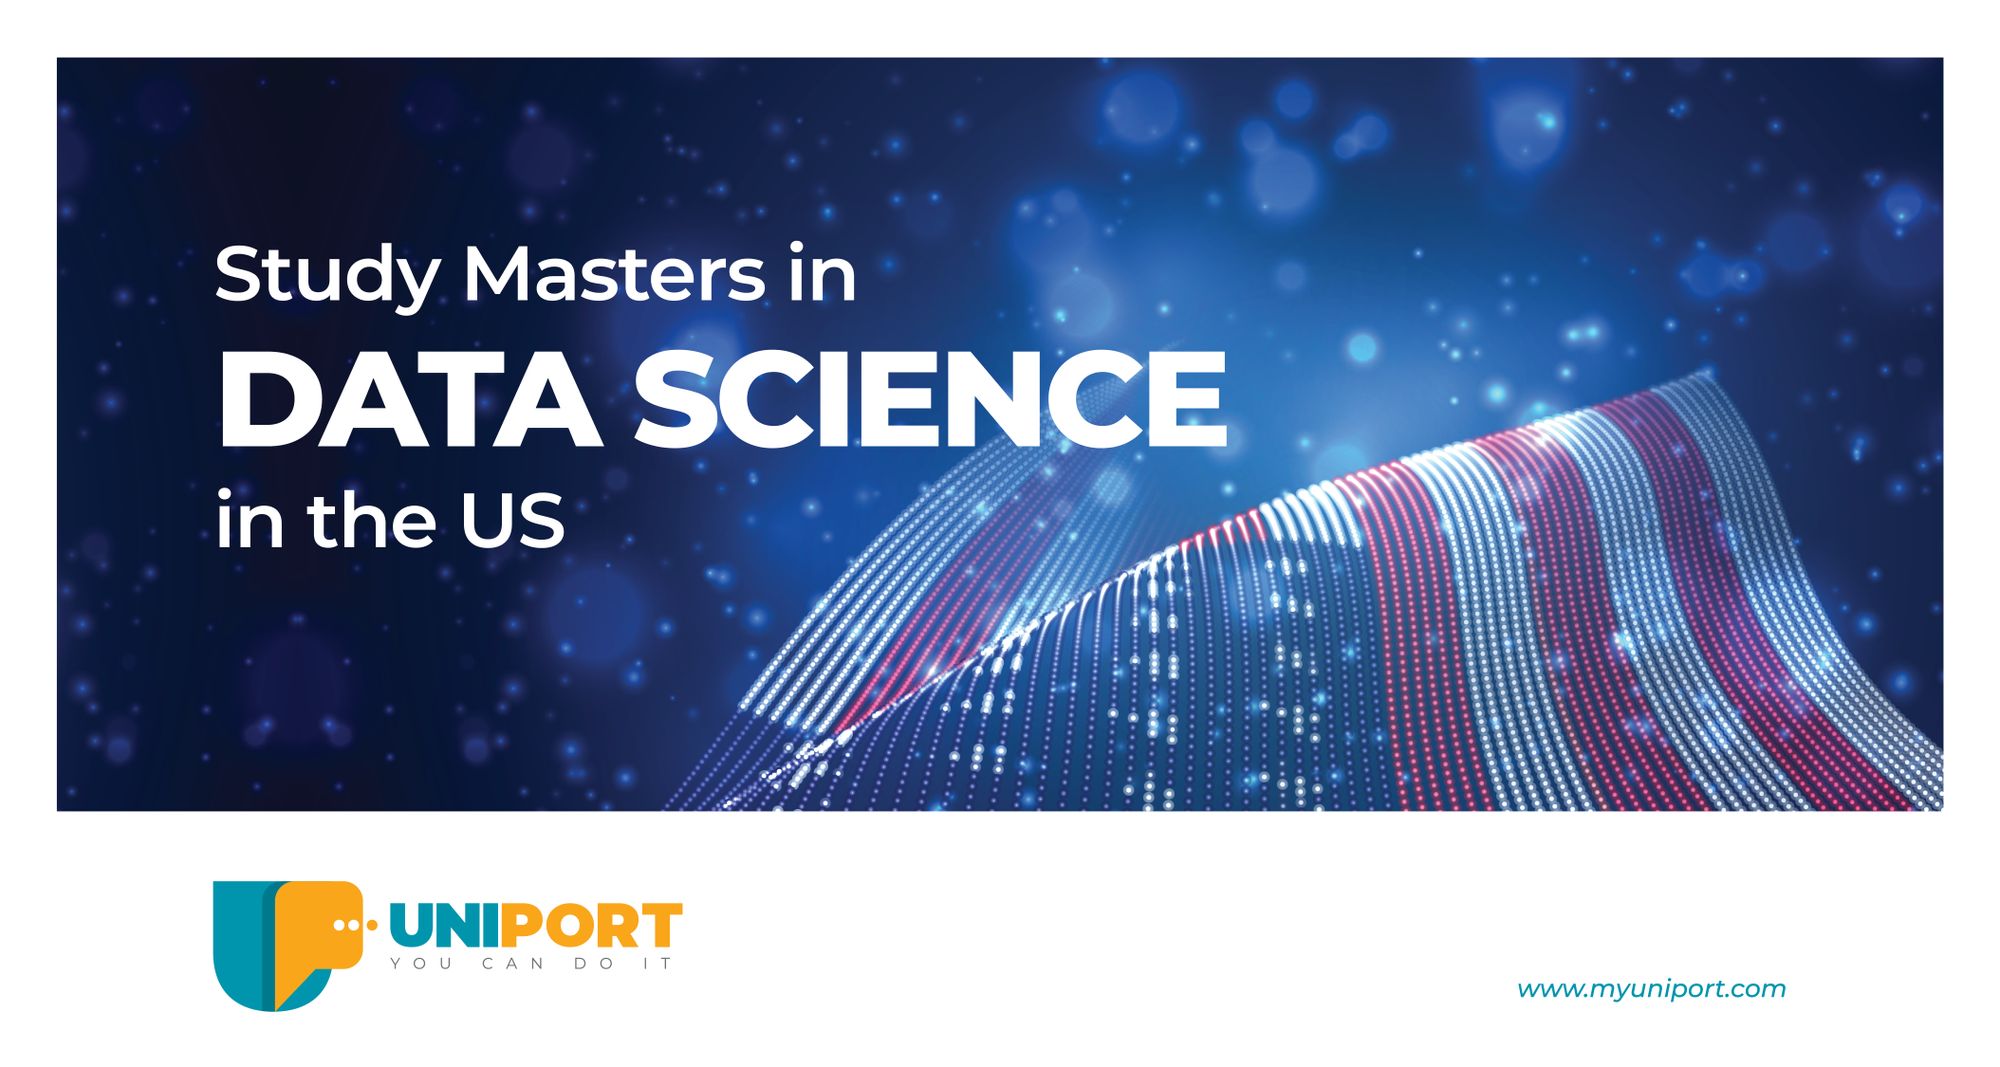 Study Masters in Data Science in the US